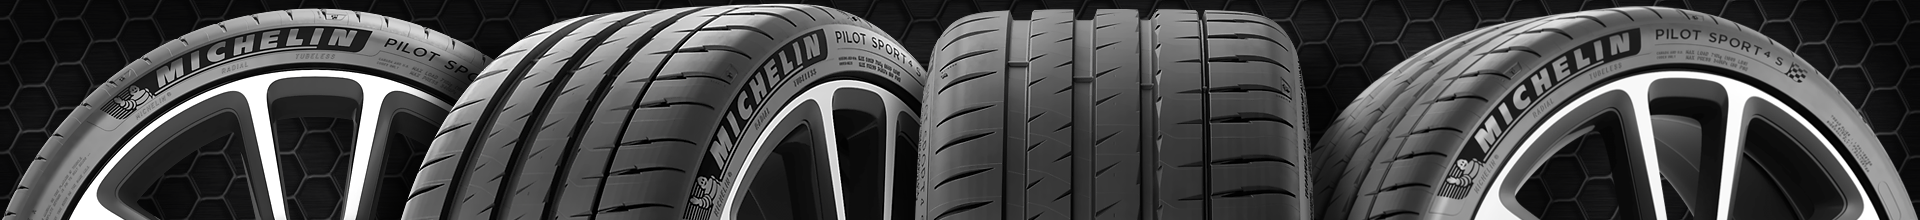 285 60 20 discount tires from Tire Outlet US